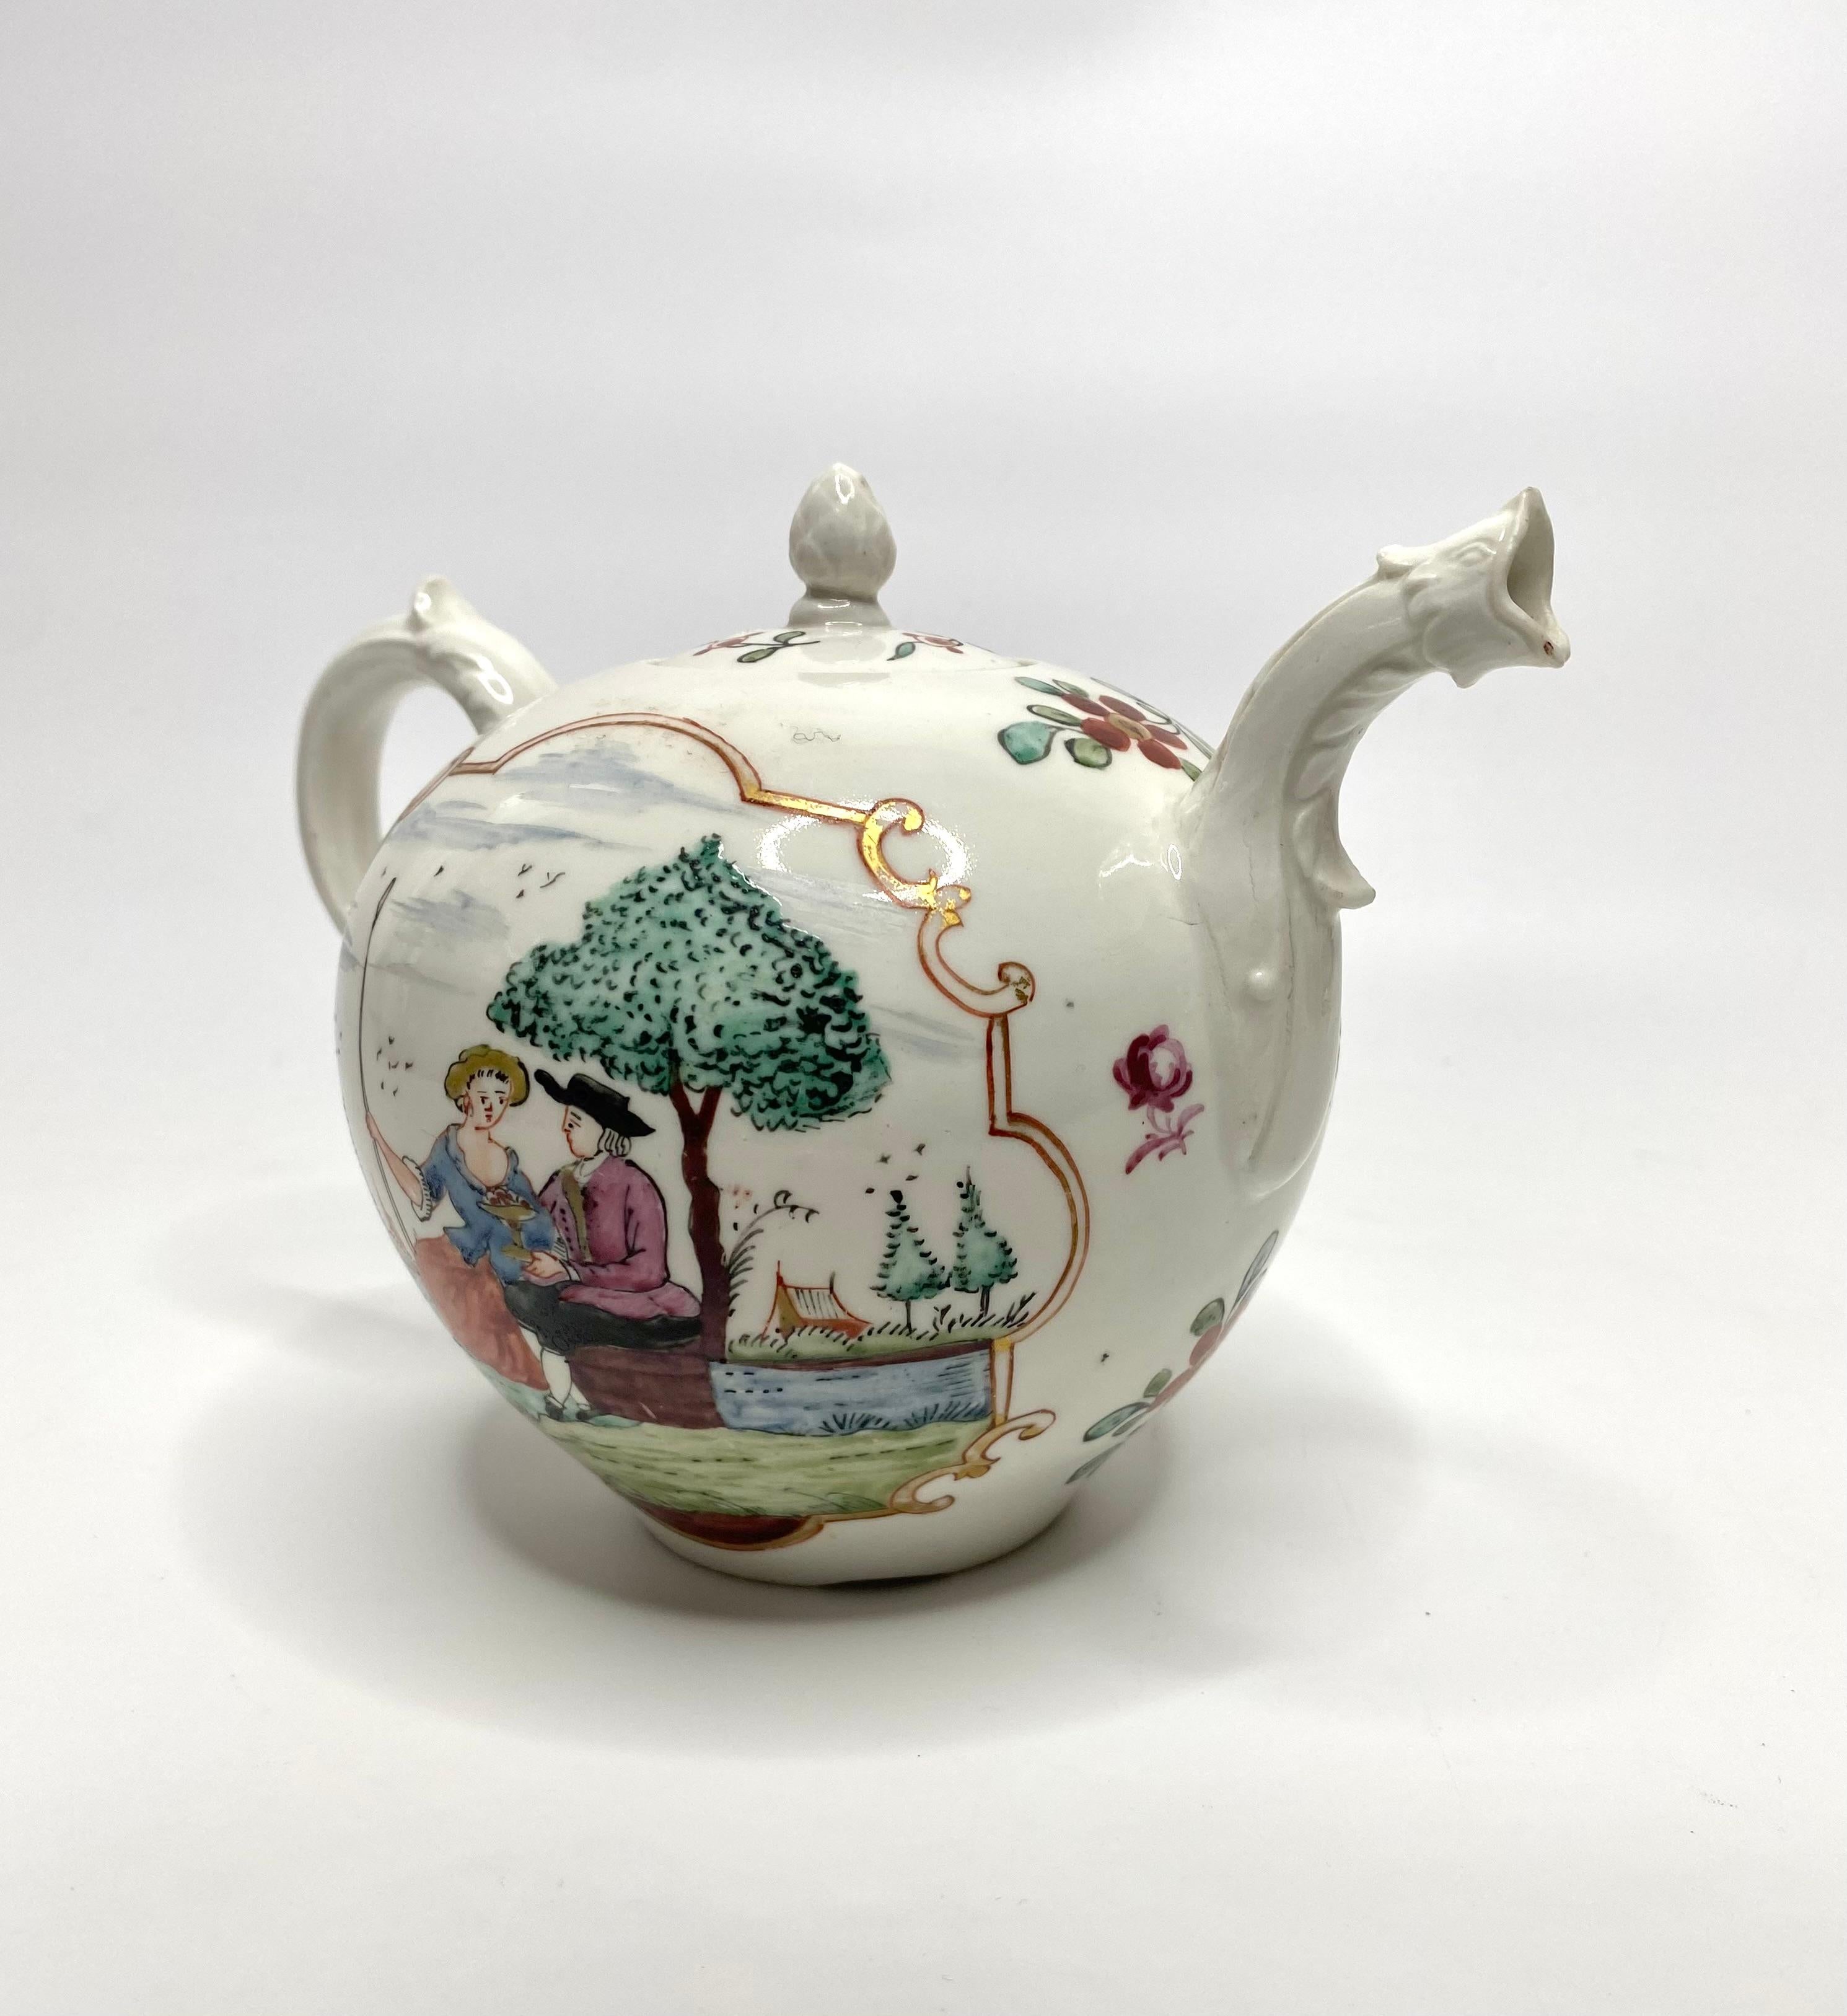 Hochst porcelain teapot and cover, c. 1755. The globular body, hand painted with a farmer and a shepherdess, seated beneath a tree, on a riverbank. The man holds a footed bowl of fruit; all within red lined, gilt scrollwork panels. Sprays of flowers